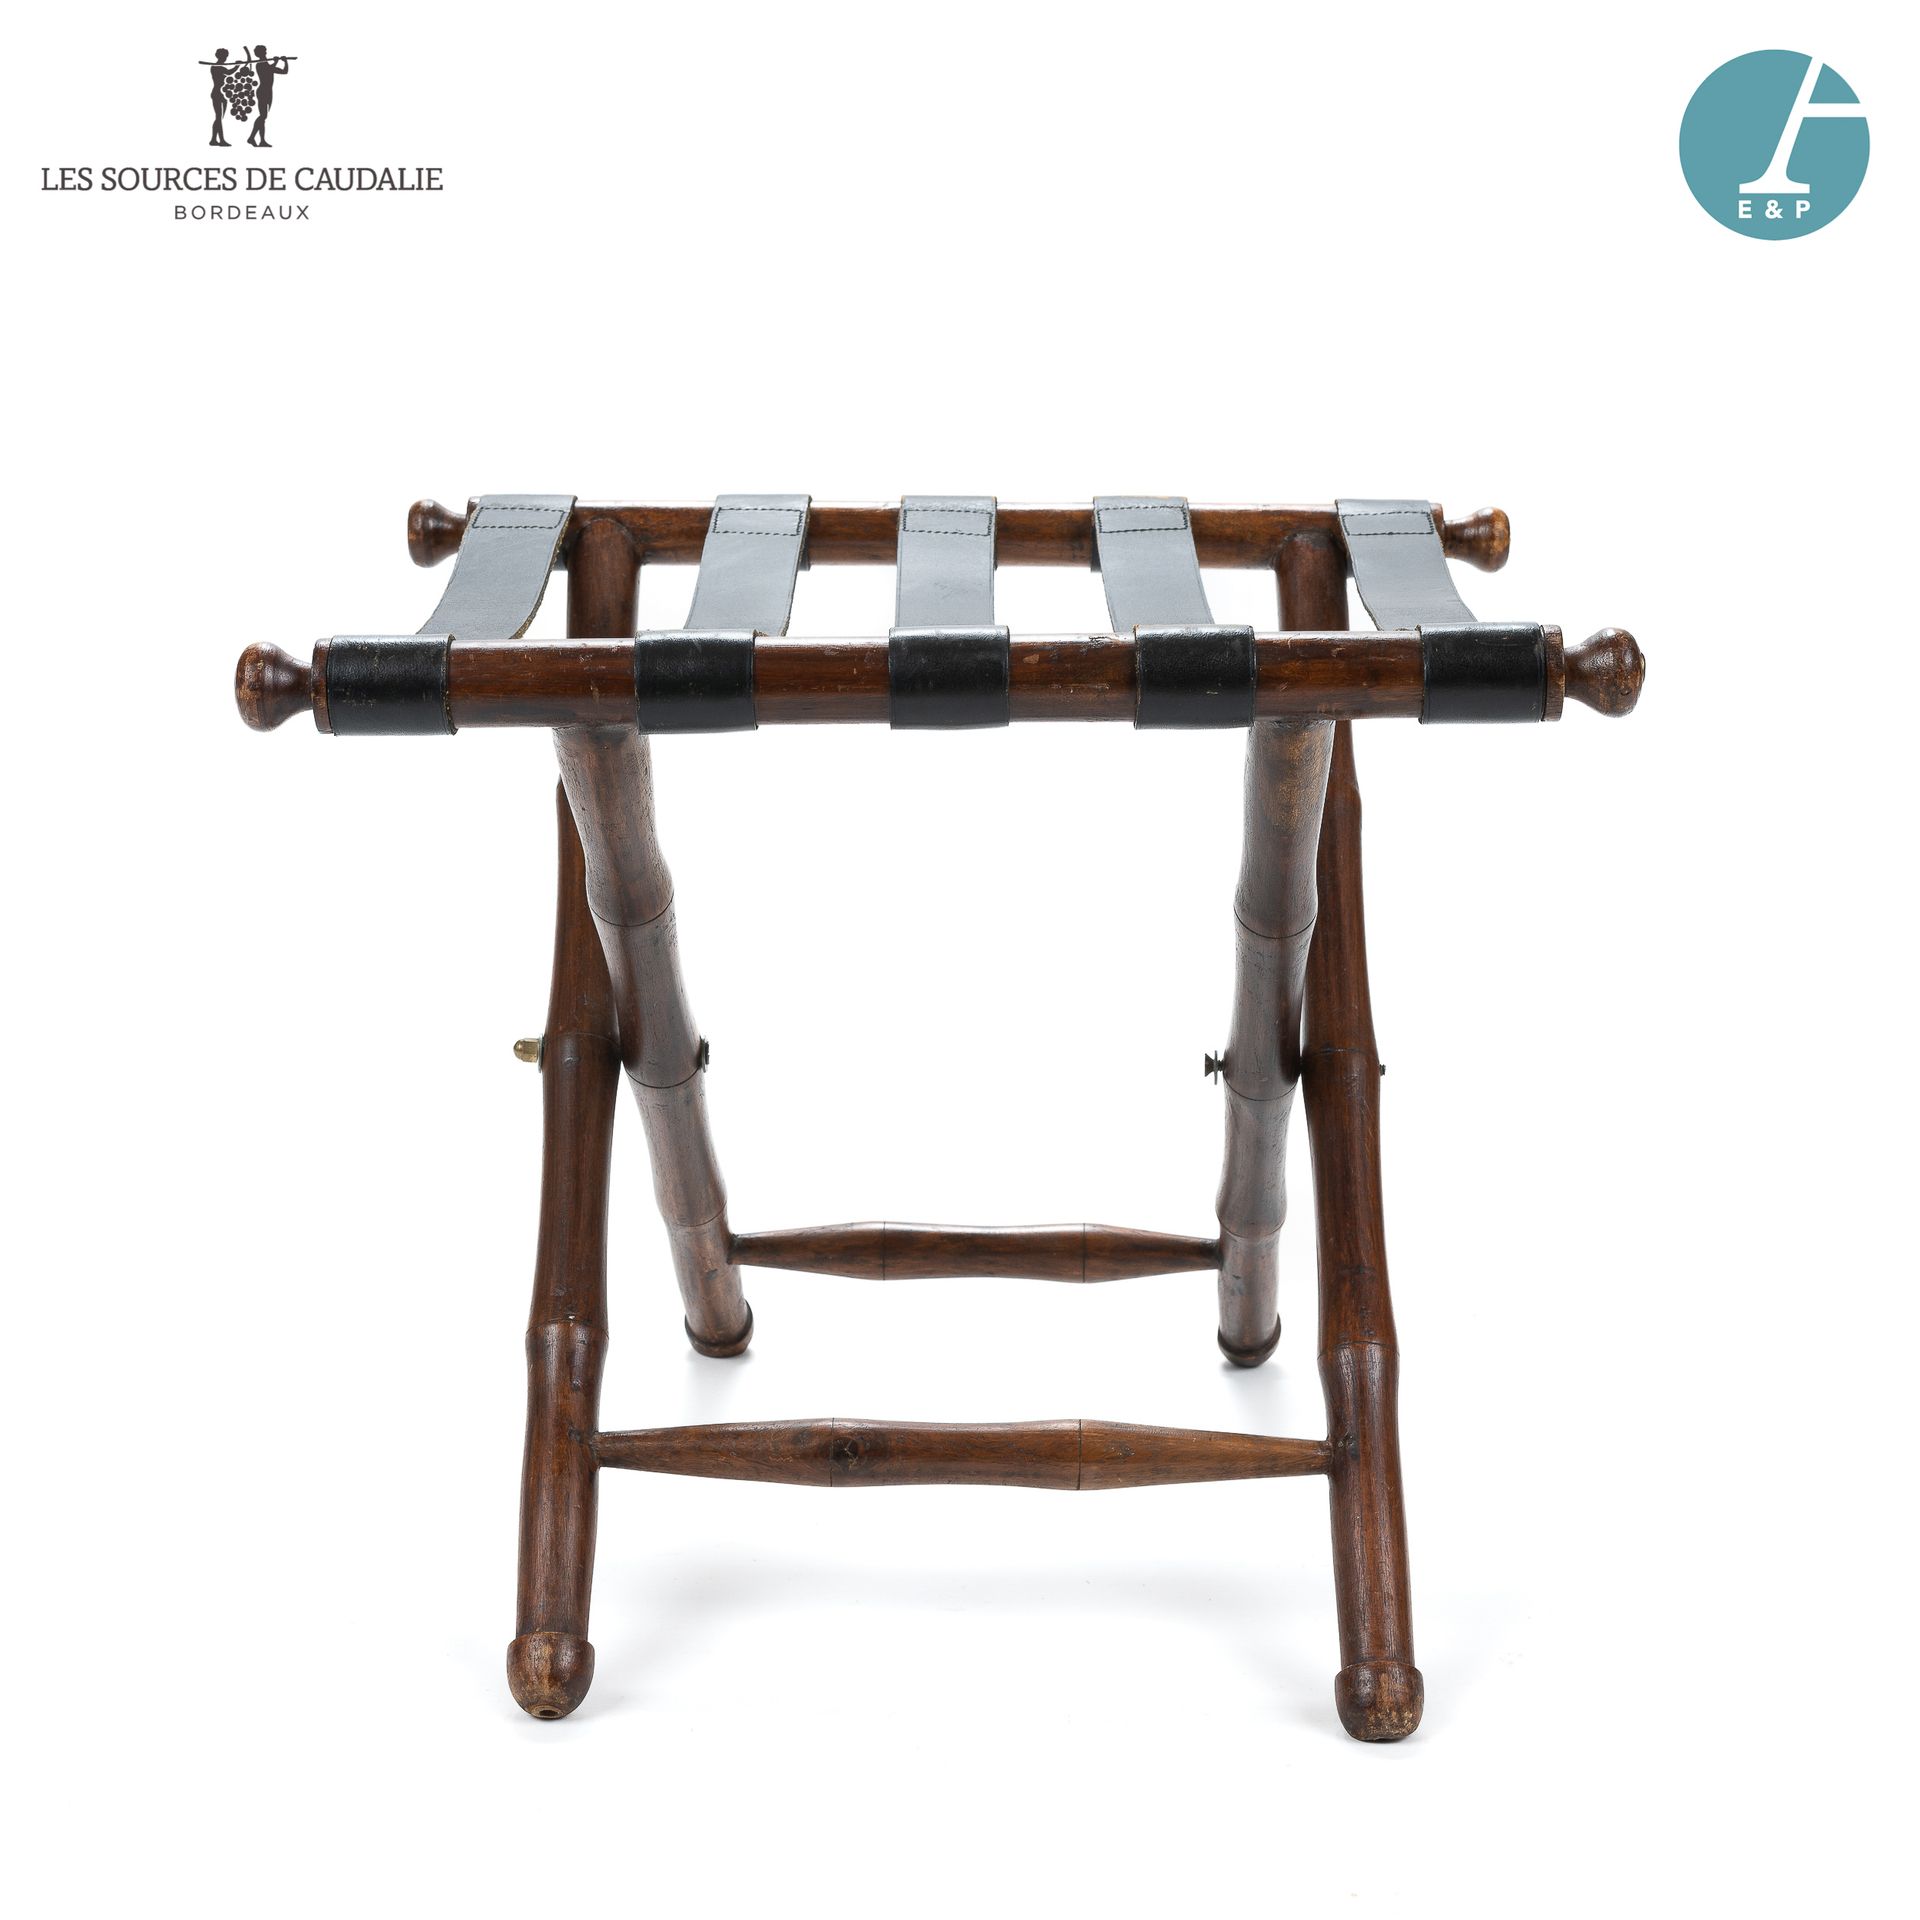 Null From Room #5 "Le Tonnelier

Folding luggage rack in mahogany stained wood, &hellip;